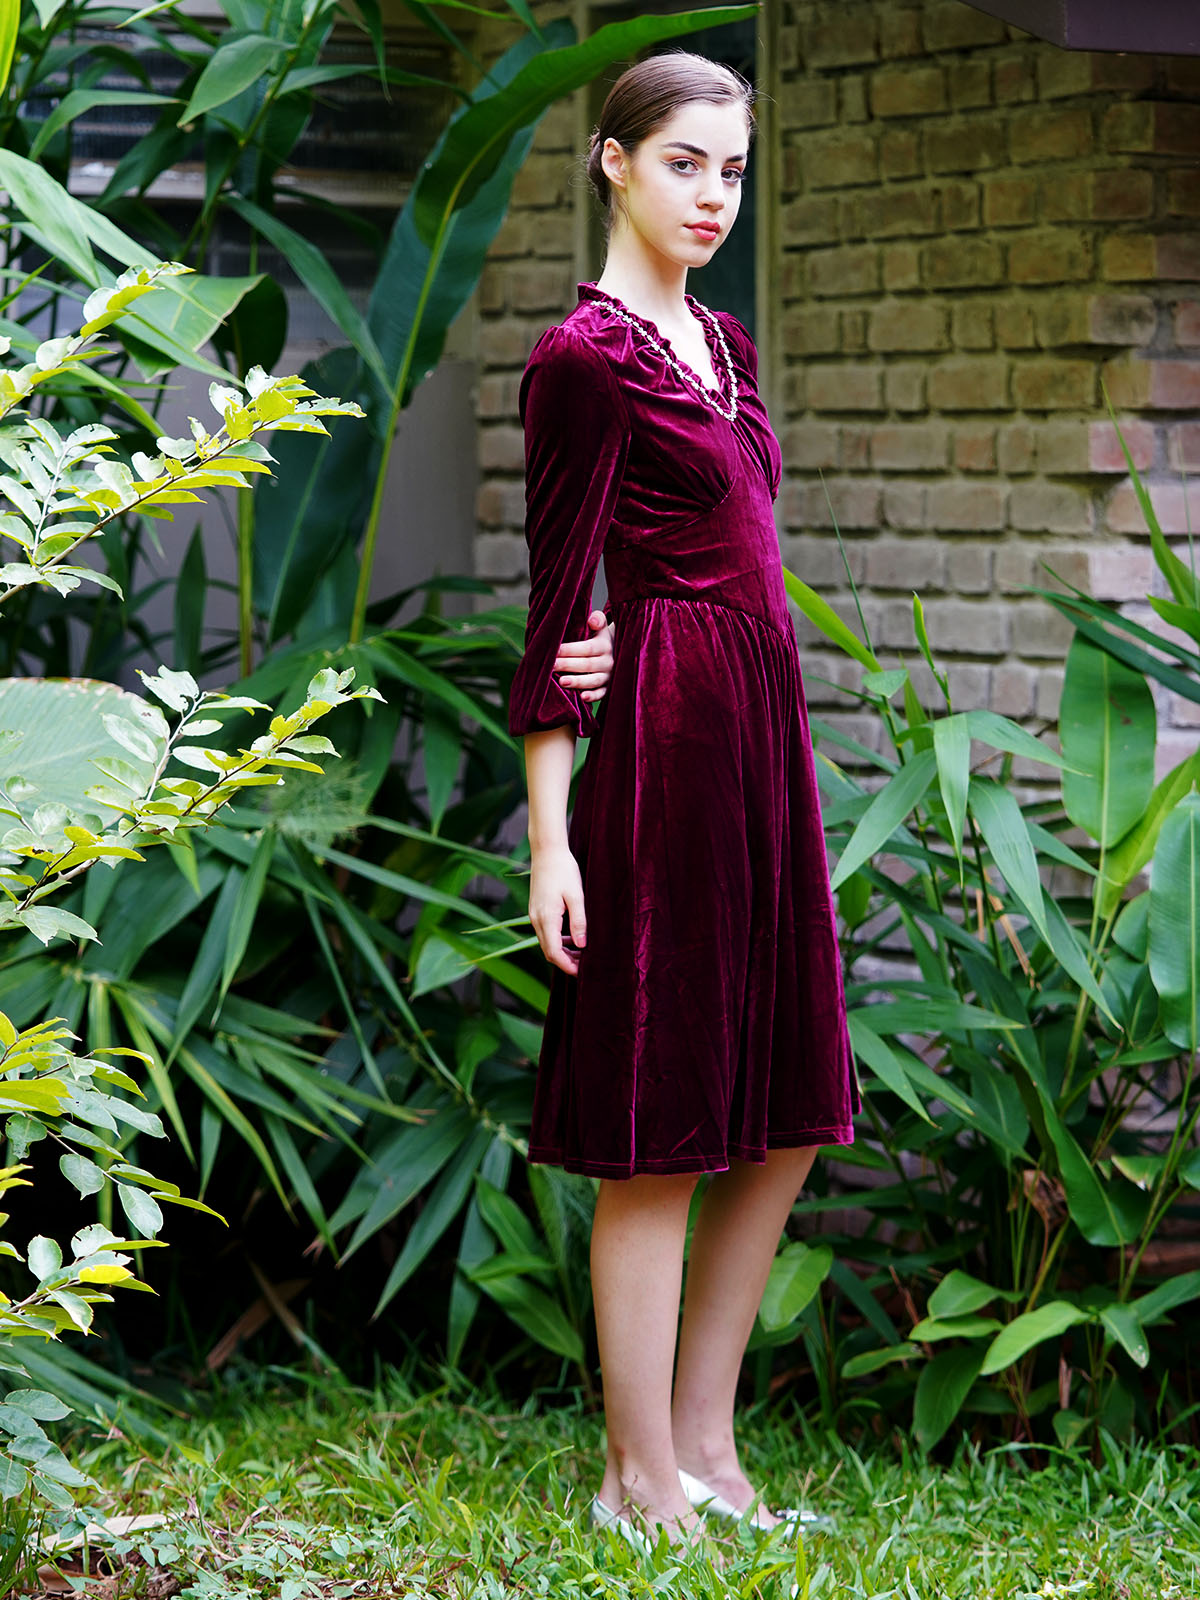 How To Style A Velvet Dress | SilkFred Blog